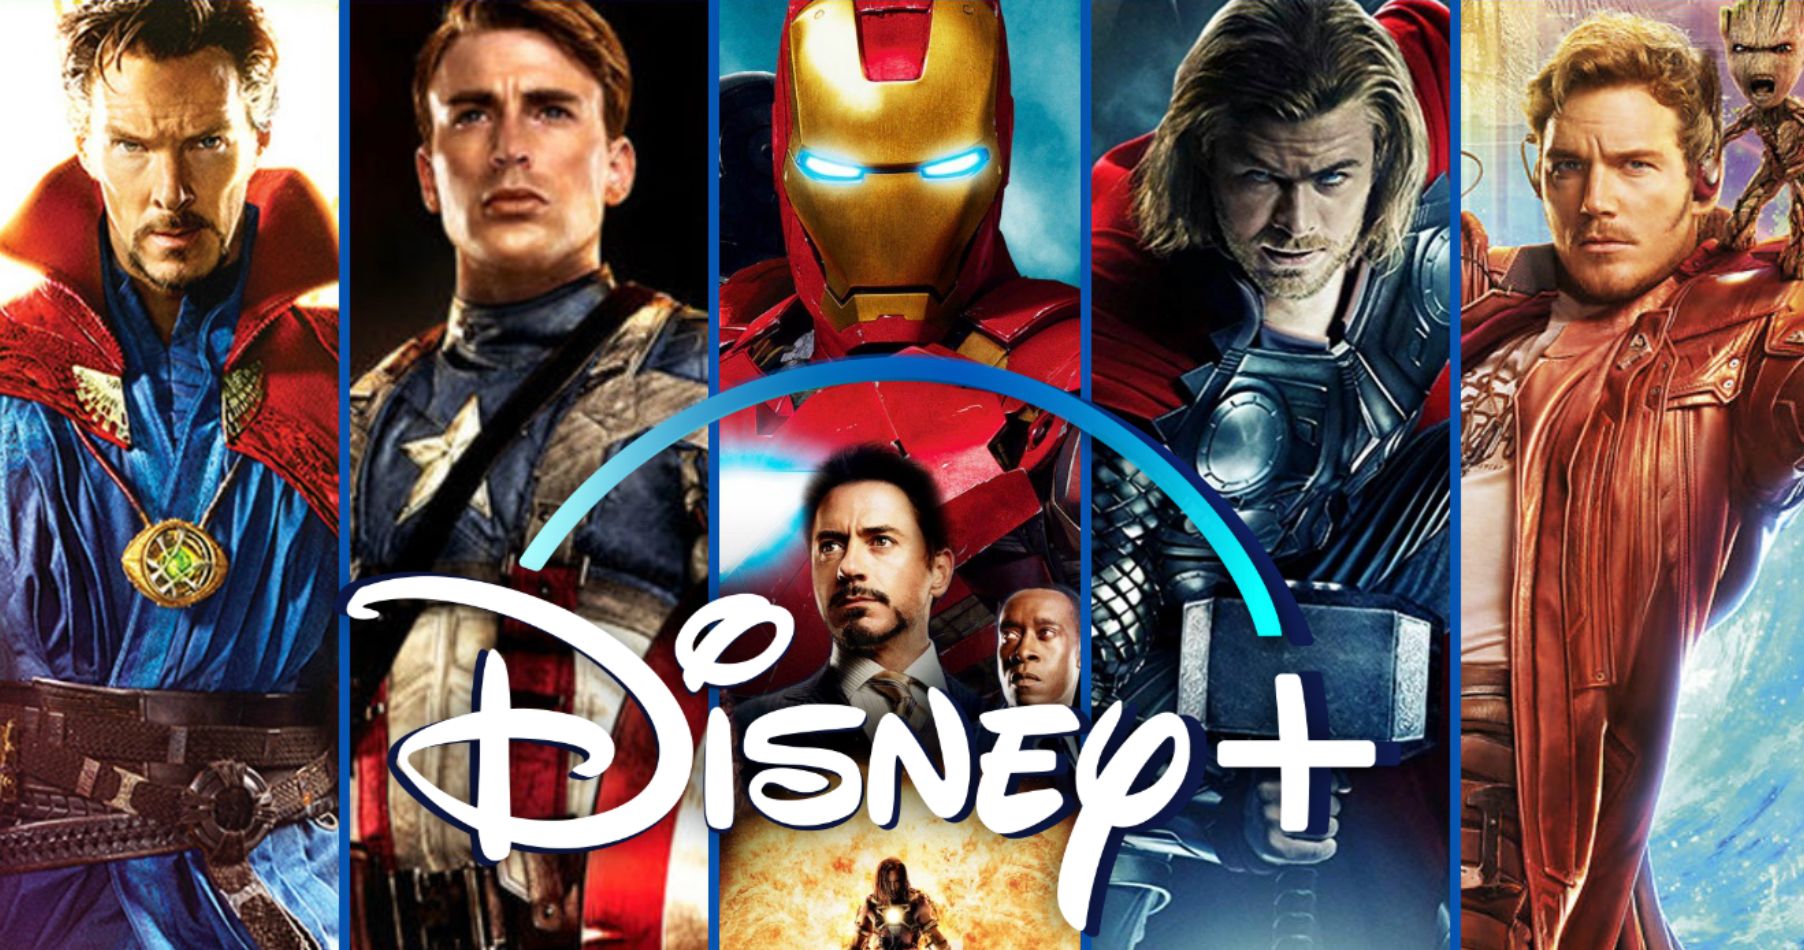 Disney+ Launches with a Lot More Marvel Movies Than Expected